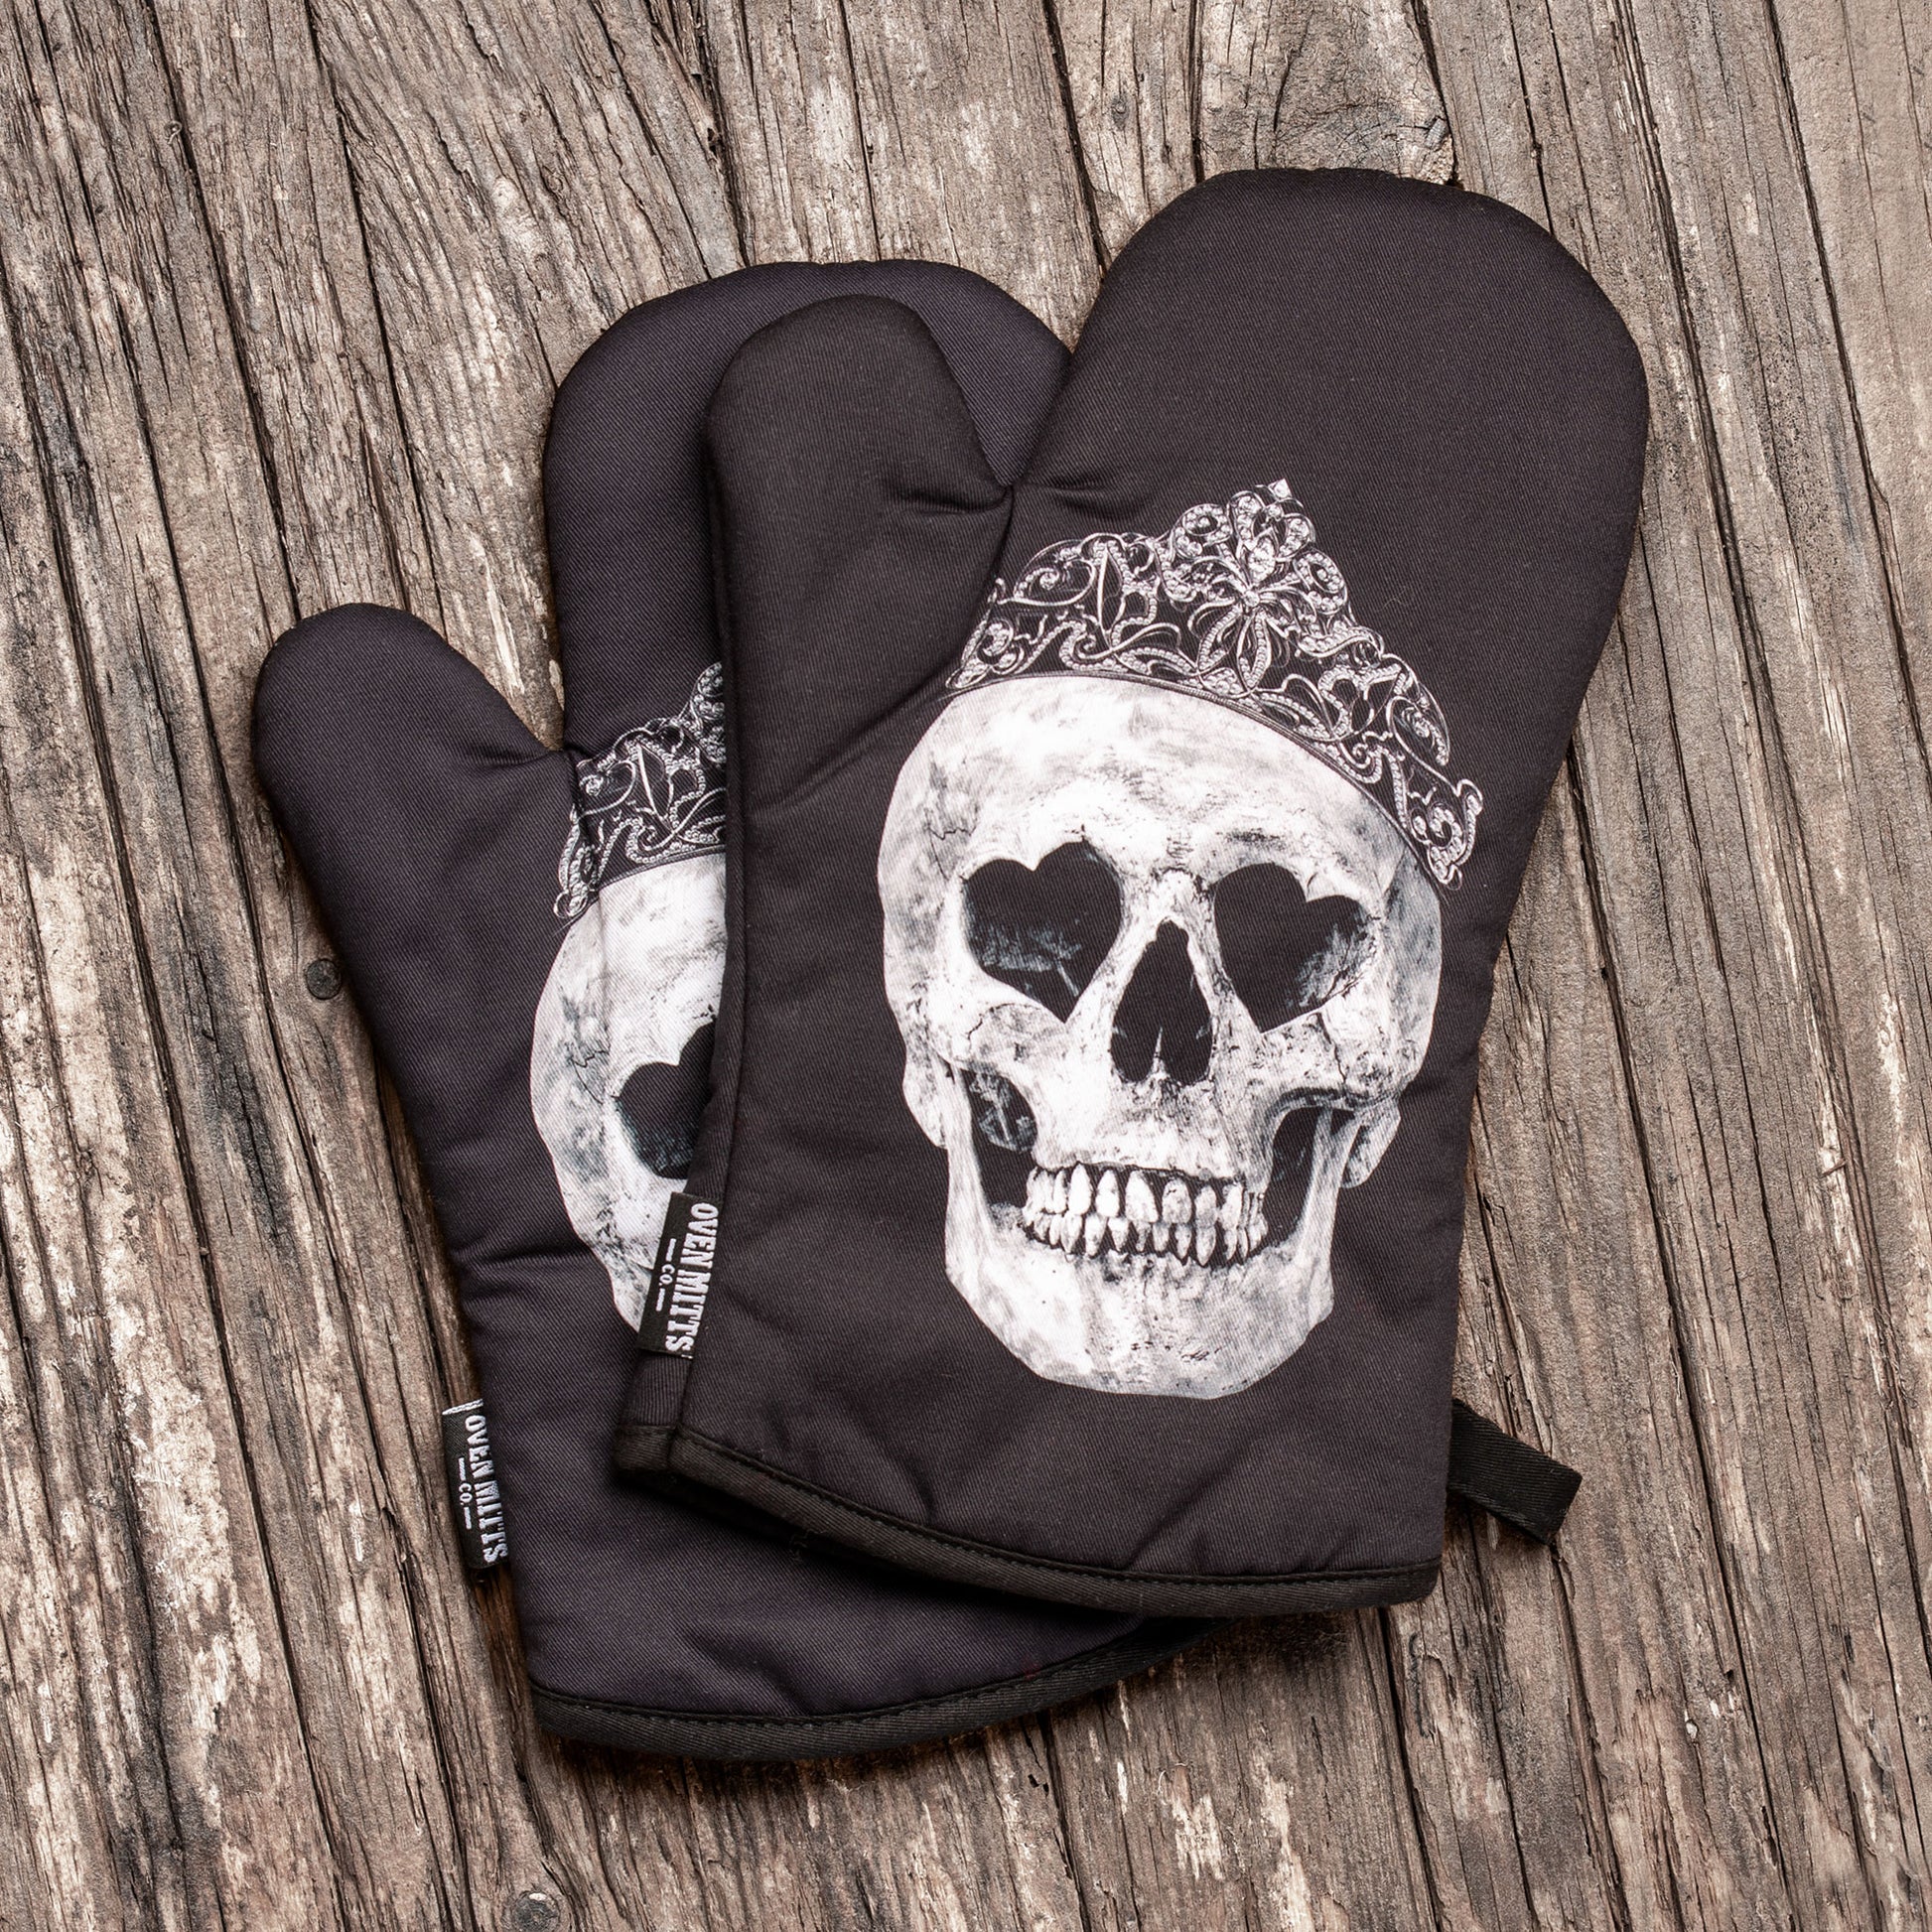 King And Queen Black Skull Oven Mitts And Potholder Set – Oven